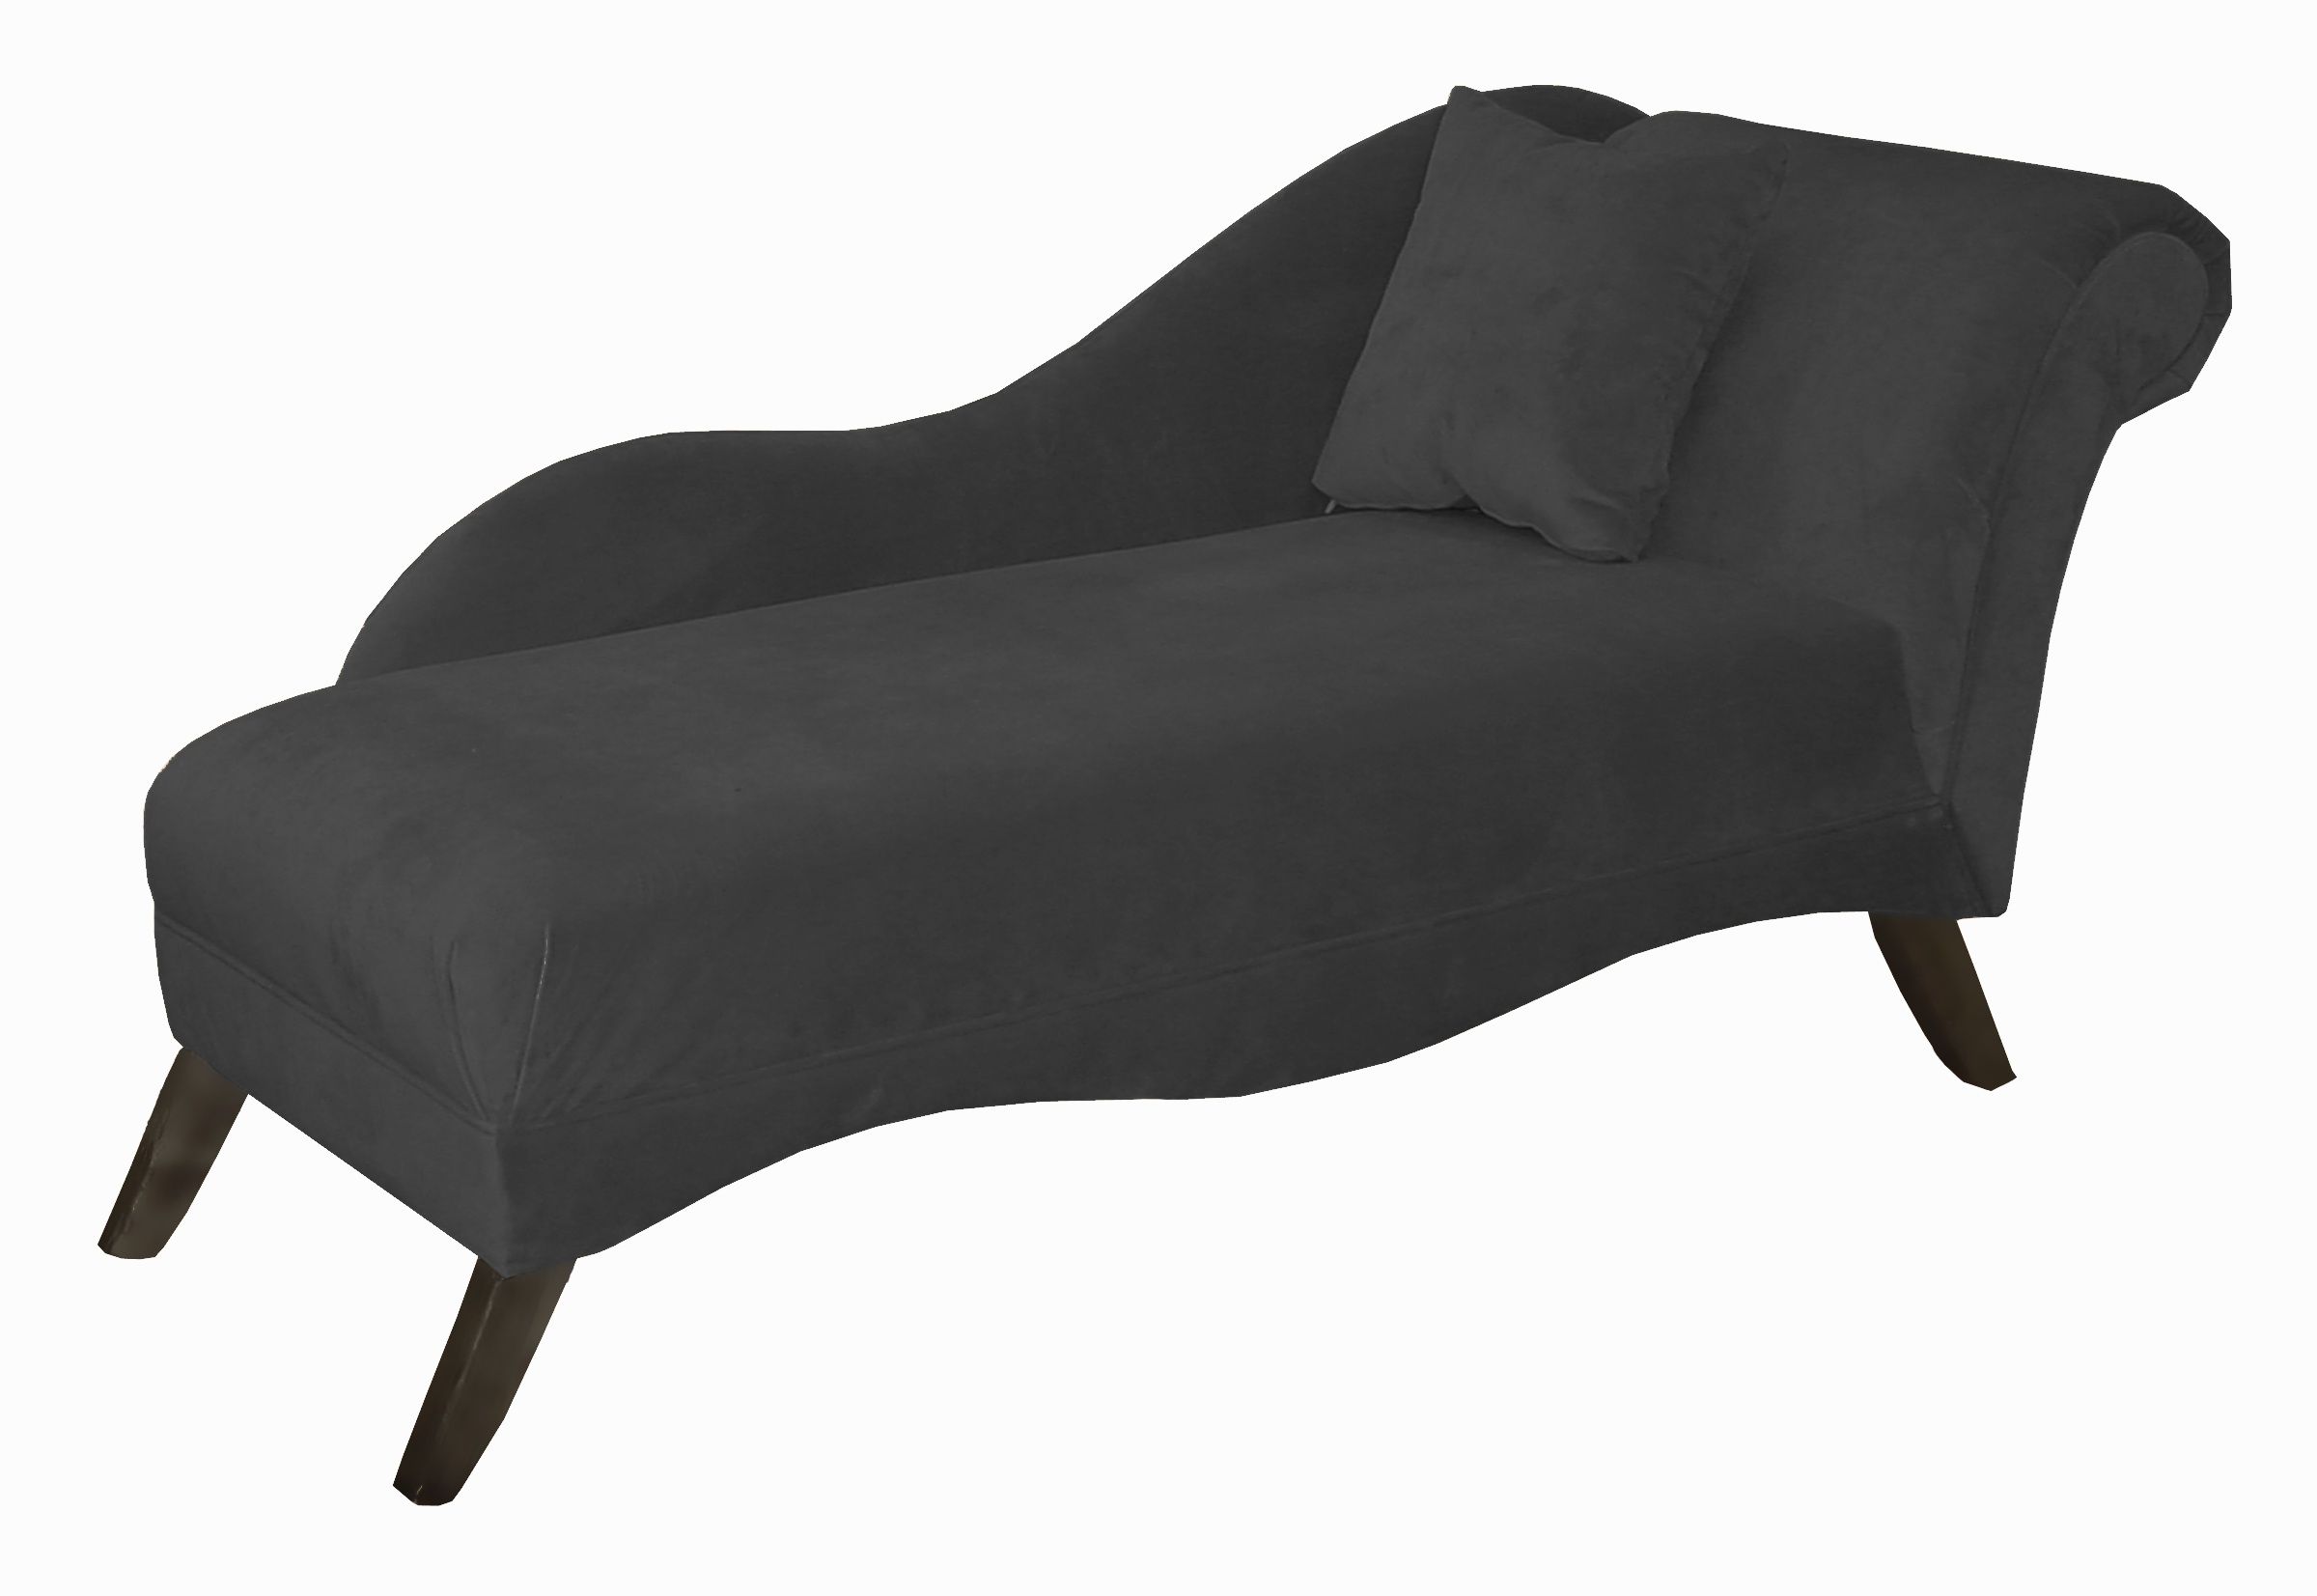 2018 Black Indoors Chaise Lounge Chairs Inside Bedroom (View 11 of 15)